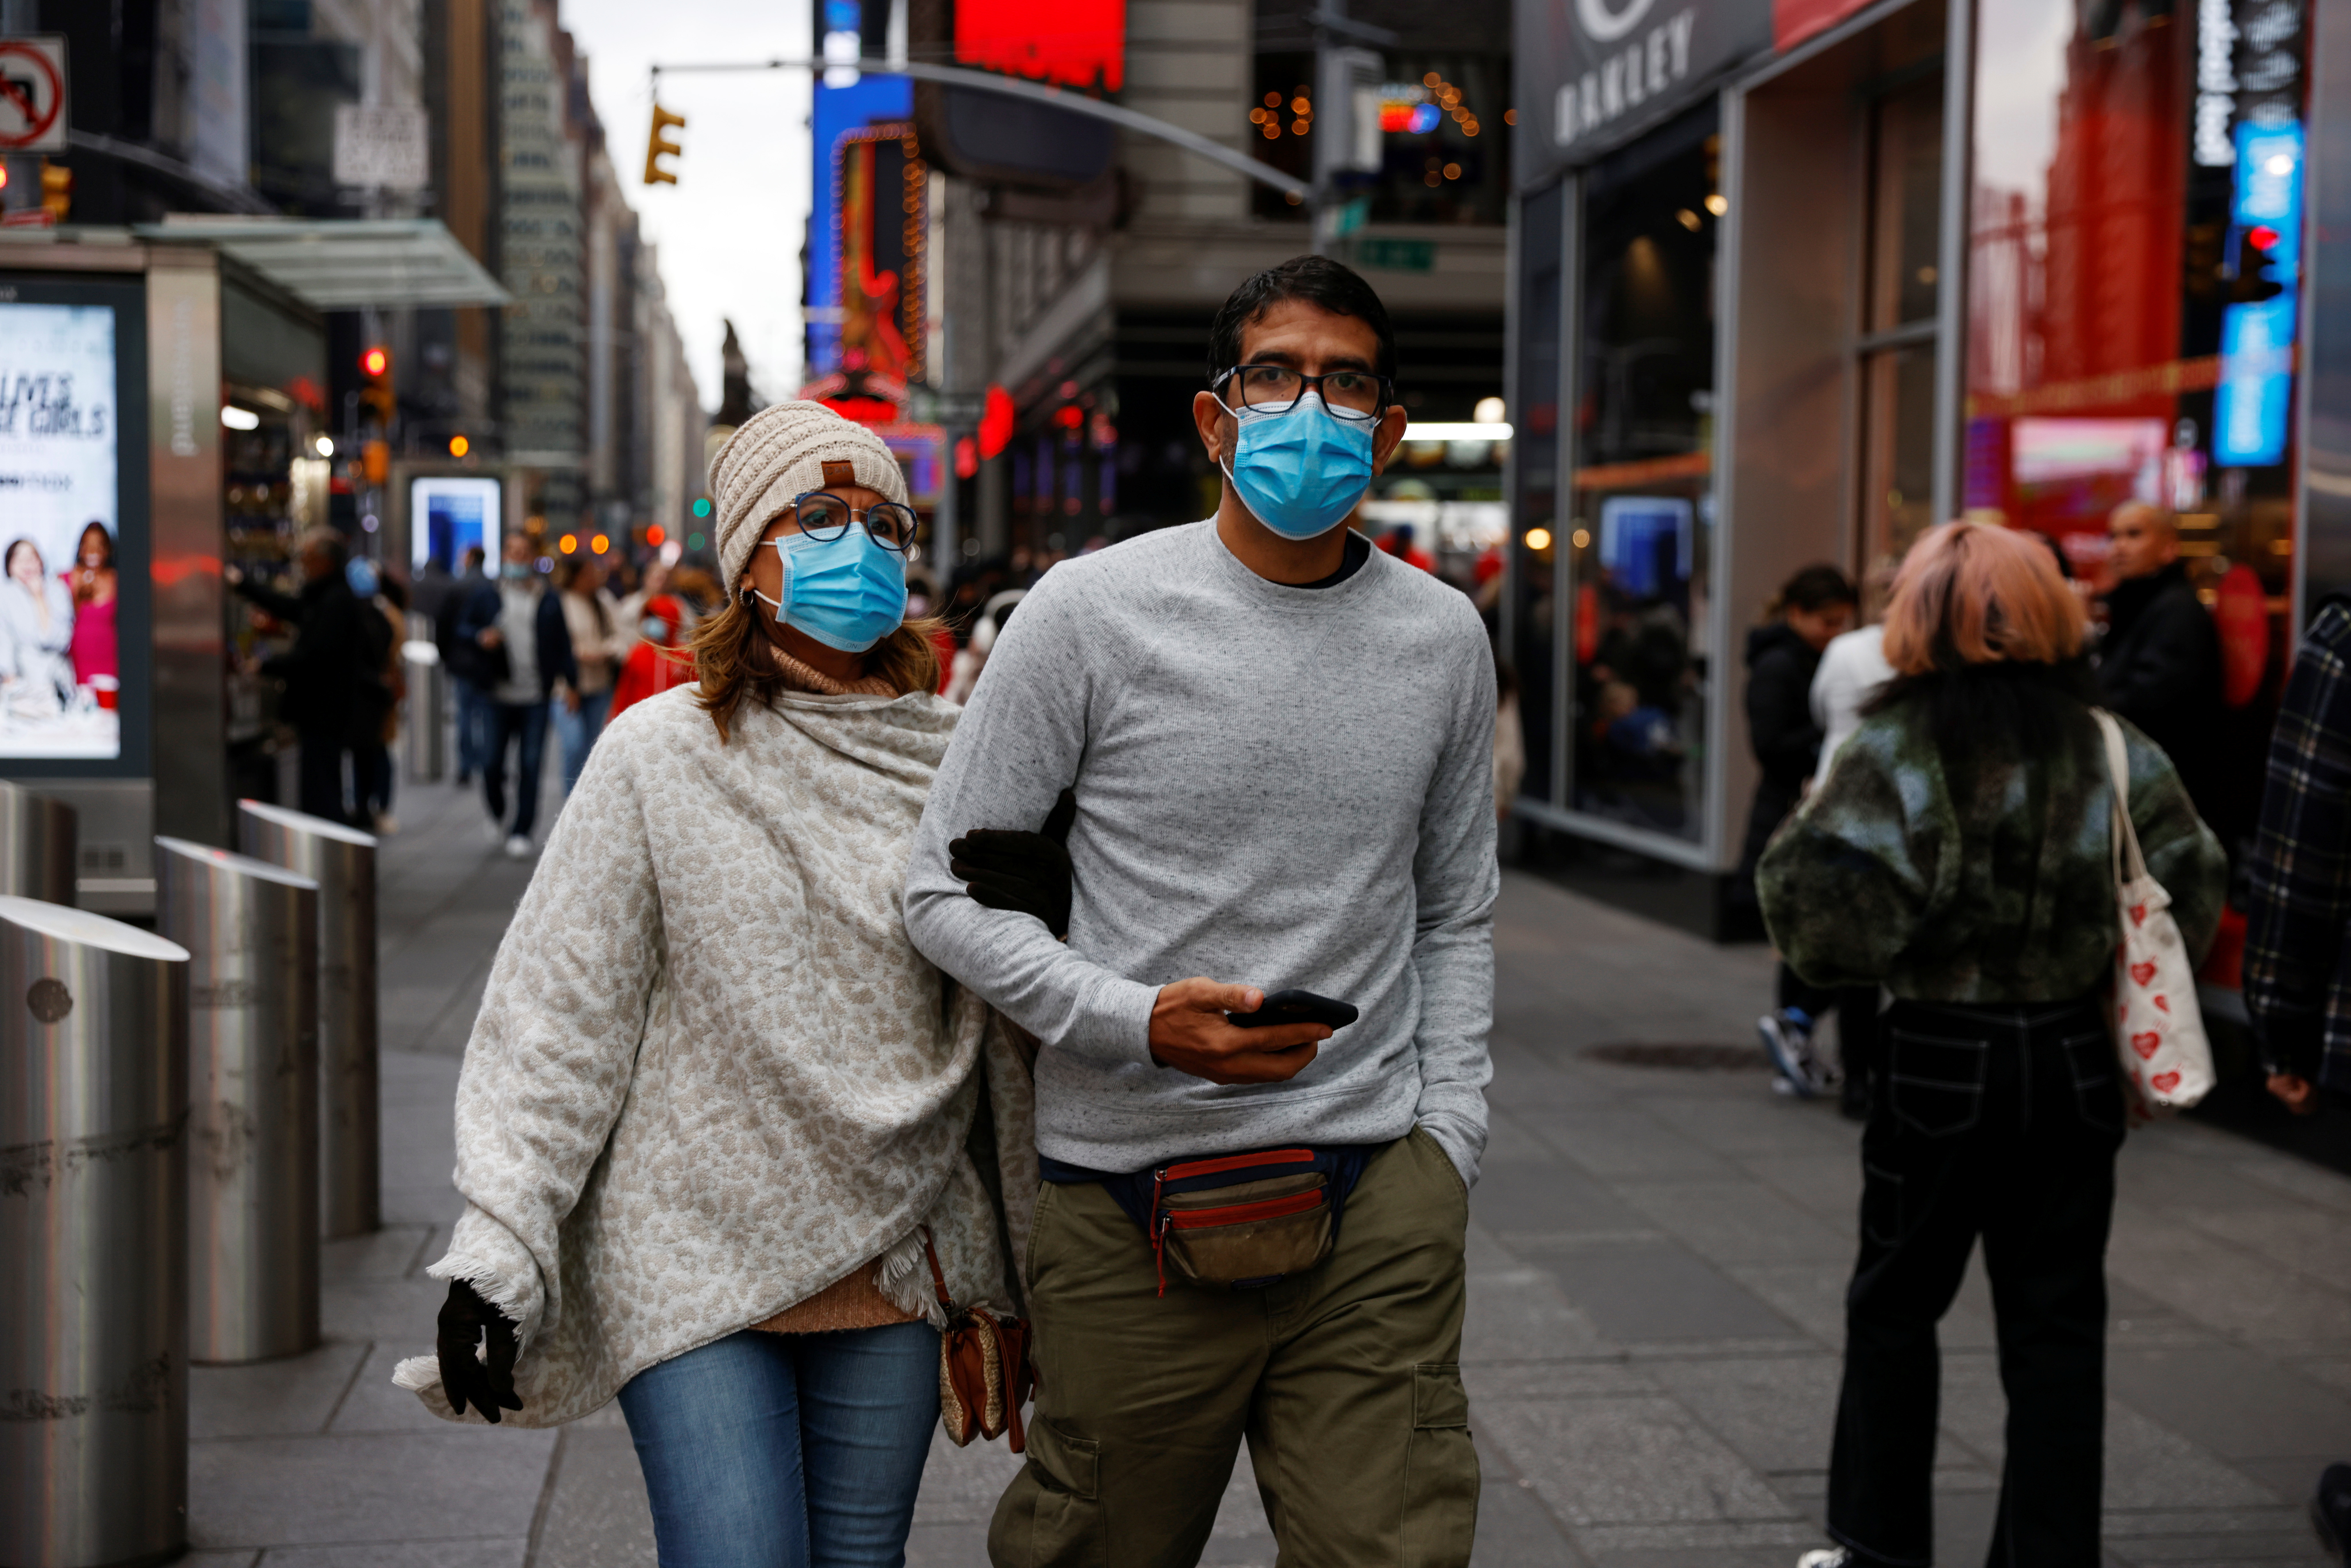 People wearing protective face masks, amid the coronavirus disease (COVID-19) pandemic, walk through Times Square in New York City